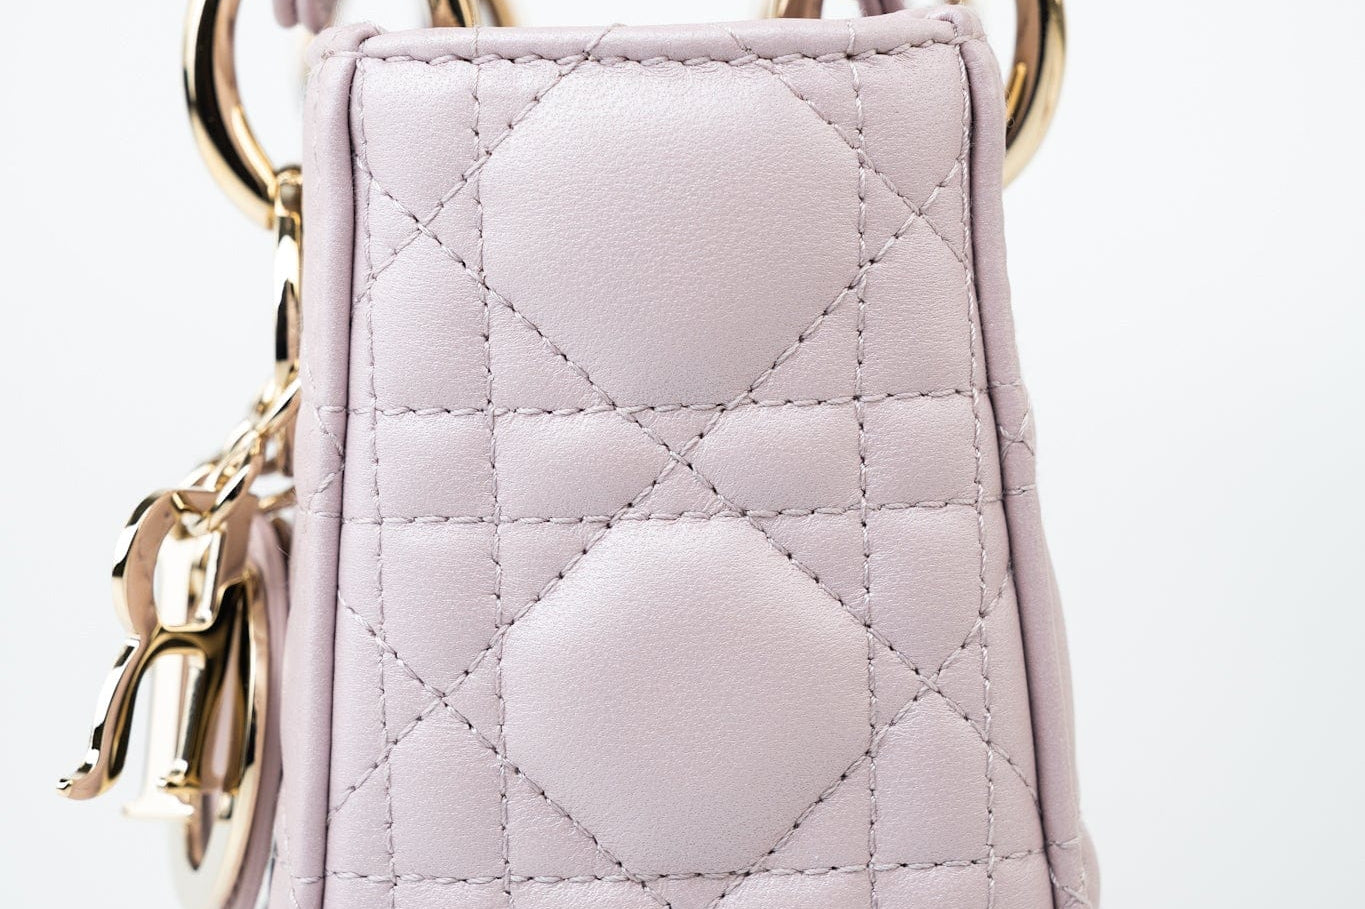 Christian Dior Handbag Christian Dior Mini Lady Dior Lotus Cannage  Pale Lilac Pink Pearlescent Lambskin - Redeluxe